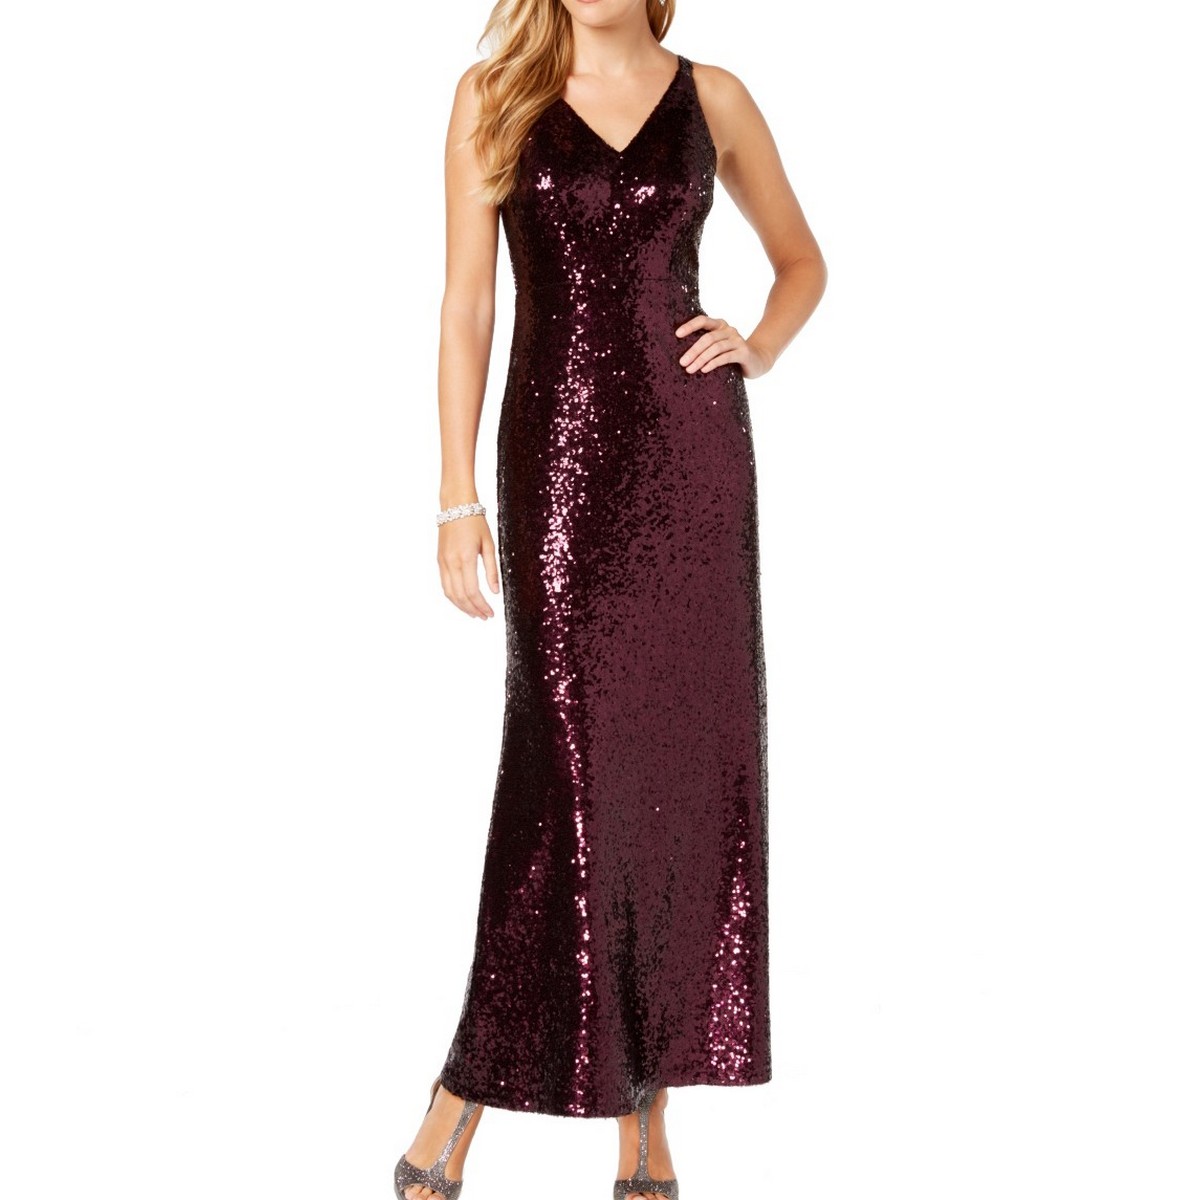 NIGHT WAY NEW Women's Mulberry Sequined V-neck Evening Ball Gown Dress ...